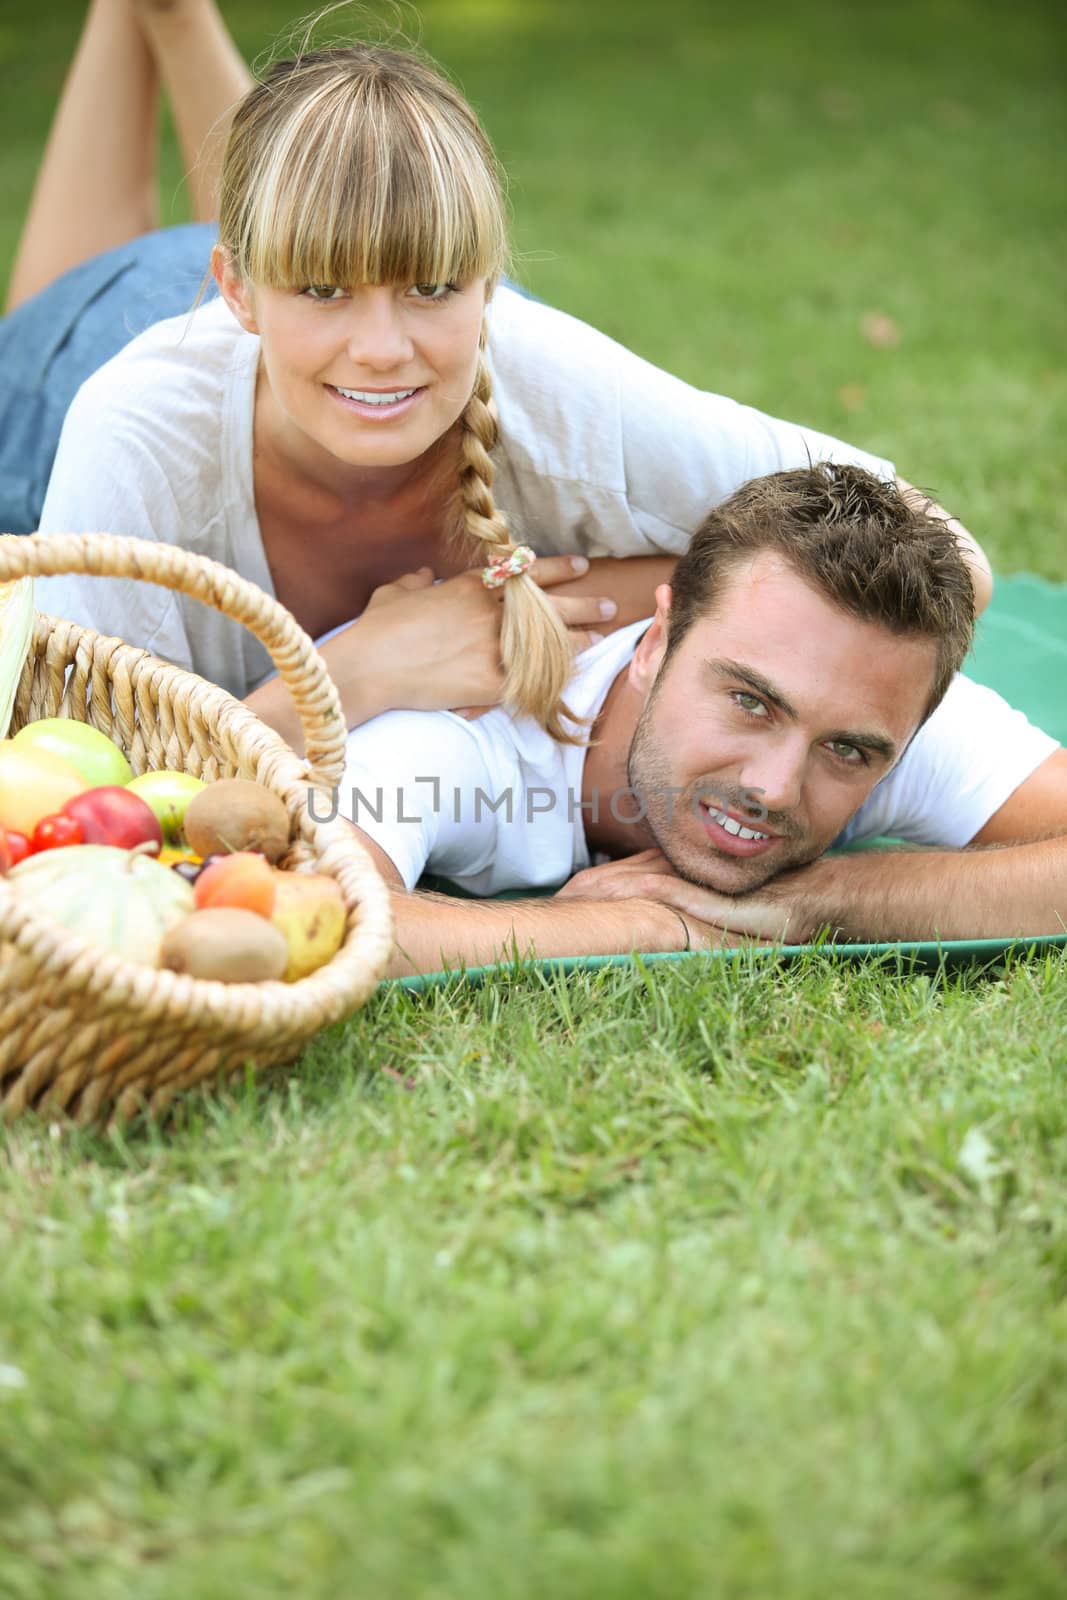 Couple having a romantic picnic together by phovoir